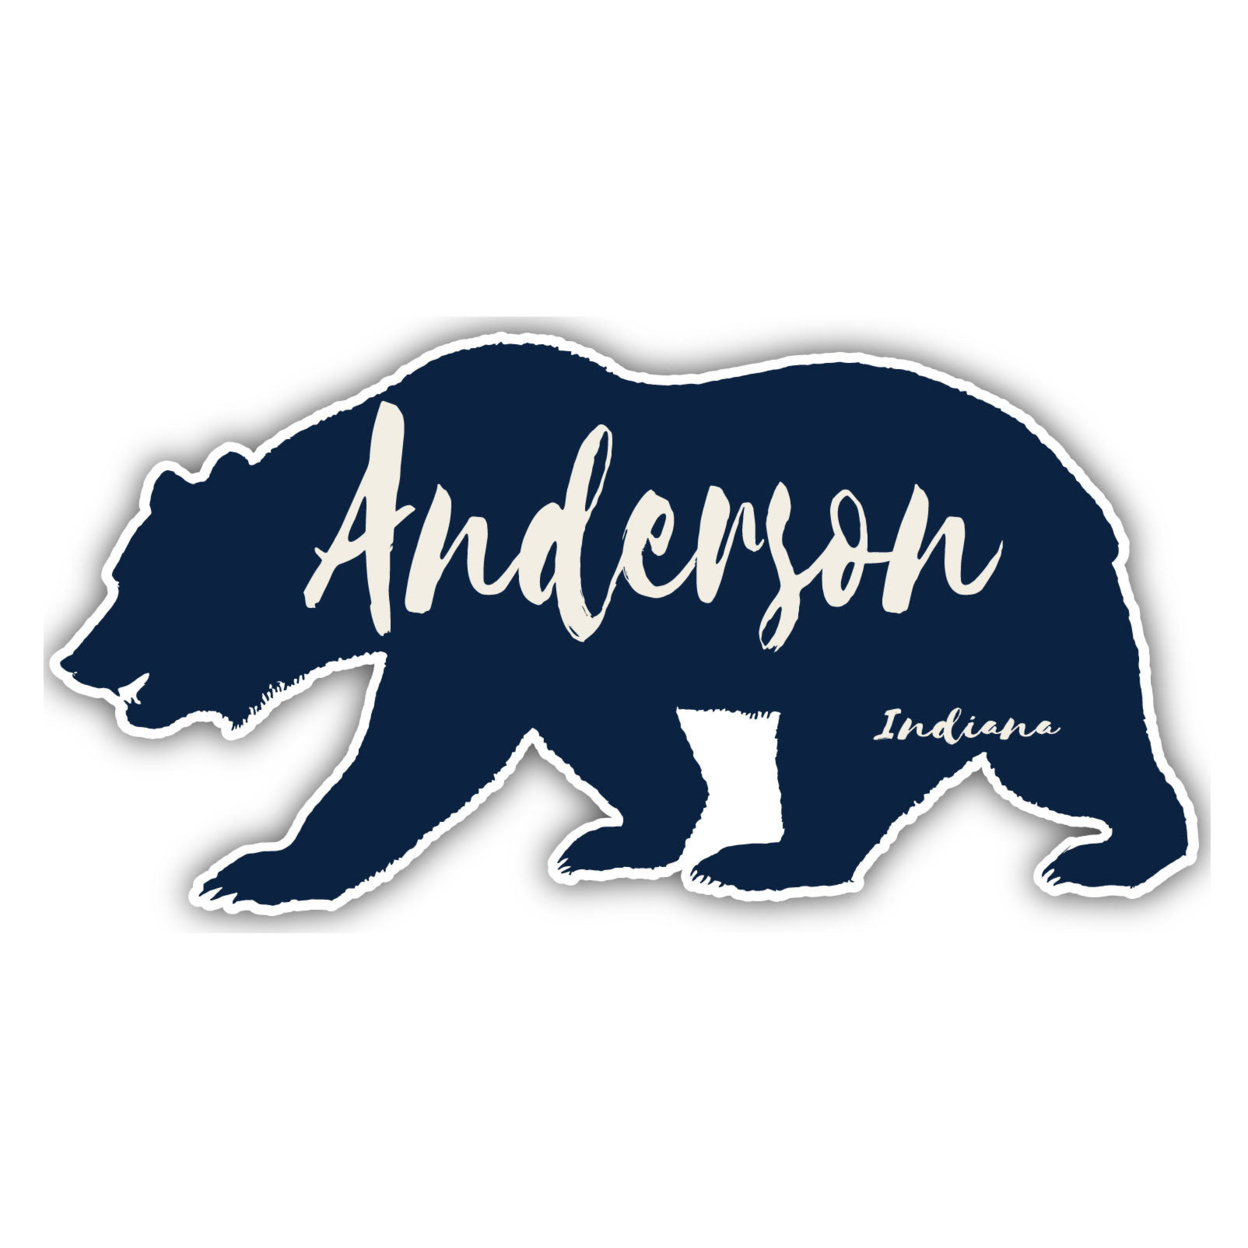 Anderson Indiana Souvenir Decorative Stickers (Choose Theme And Size) - Single Unit, 10-Inch, Bear